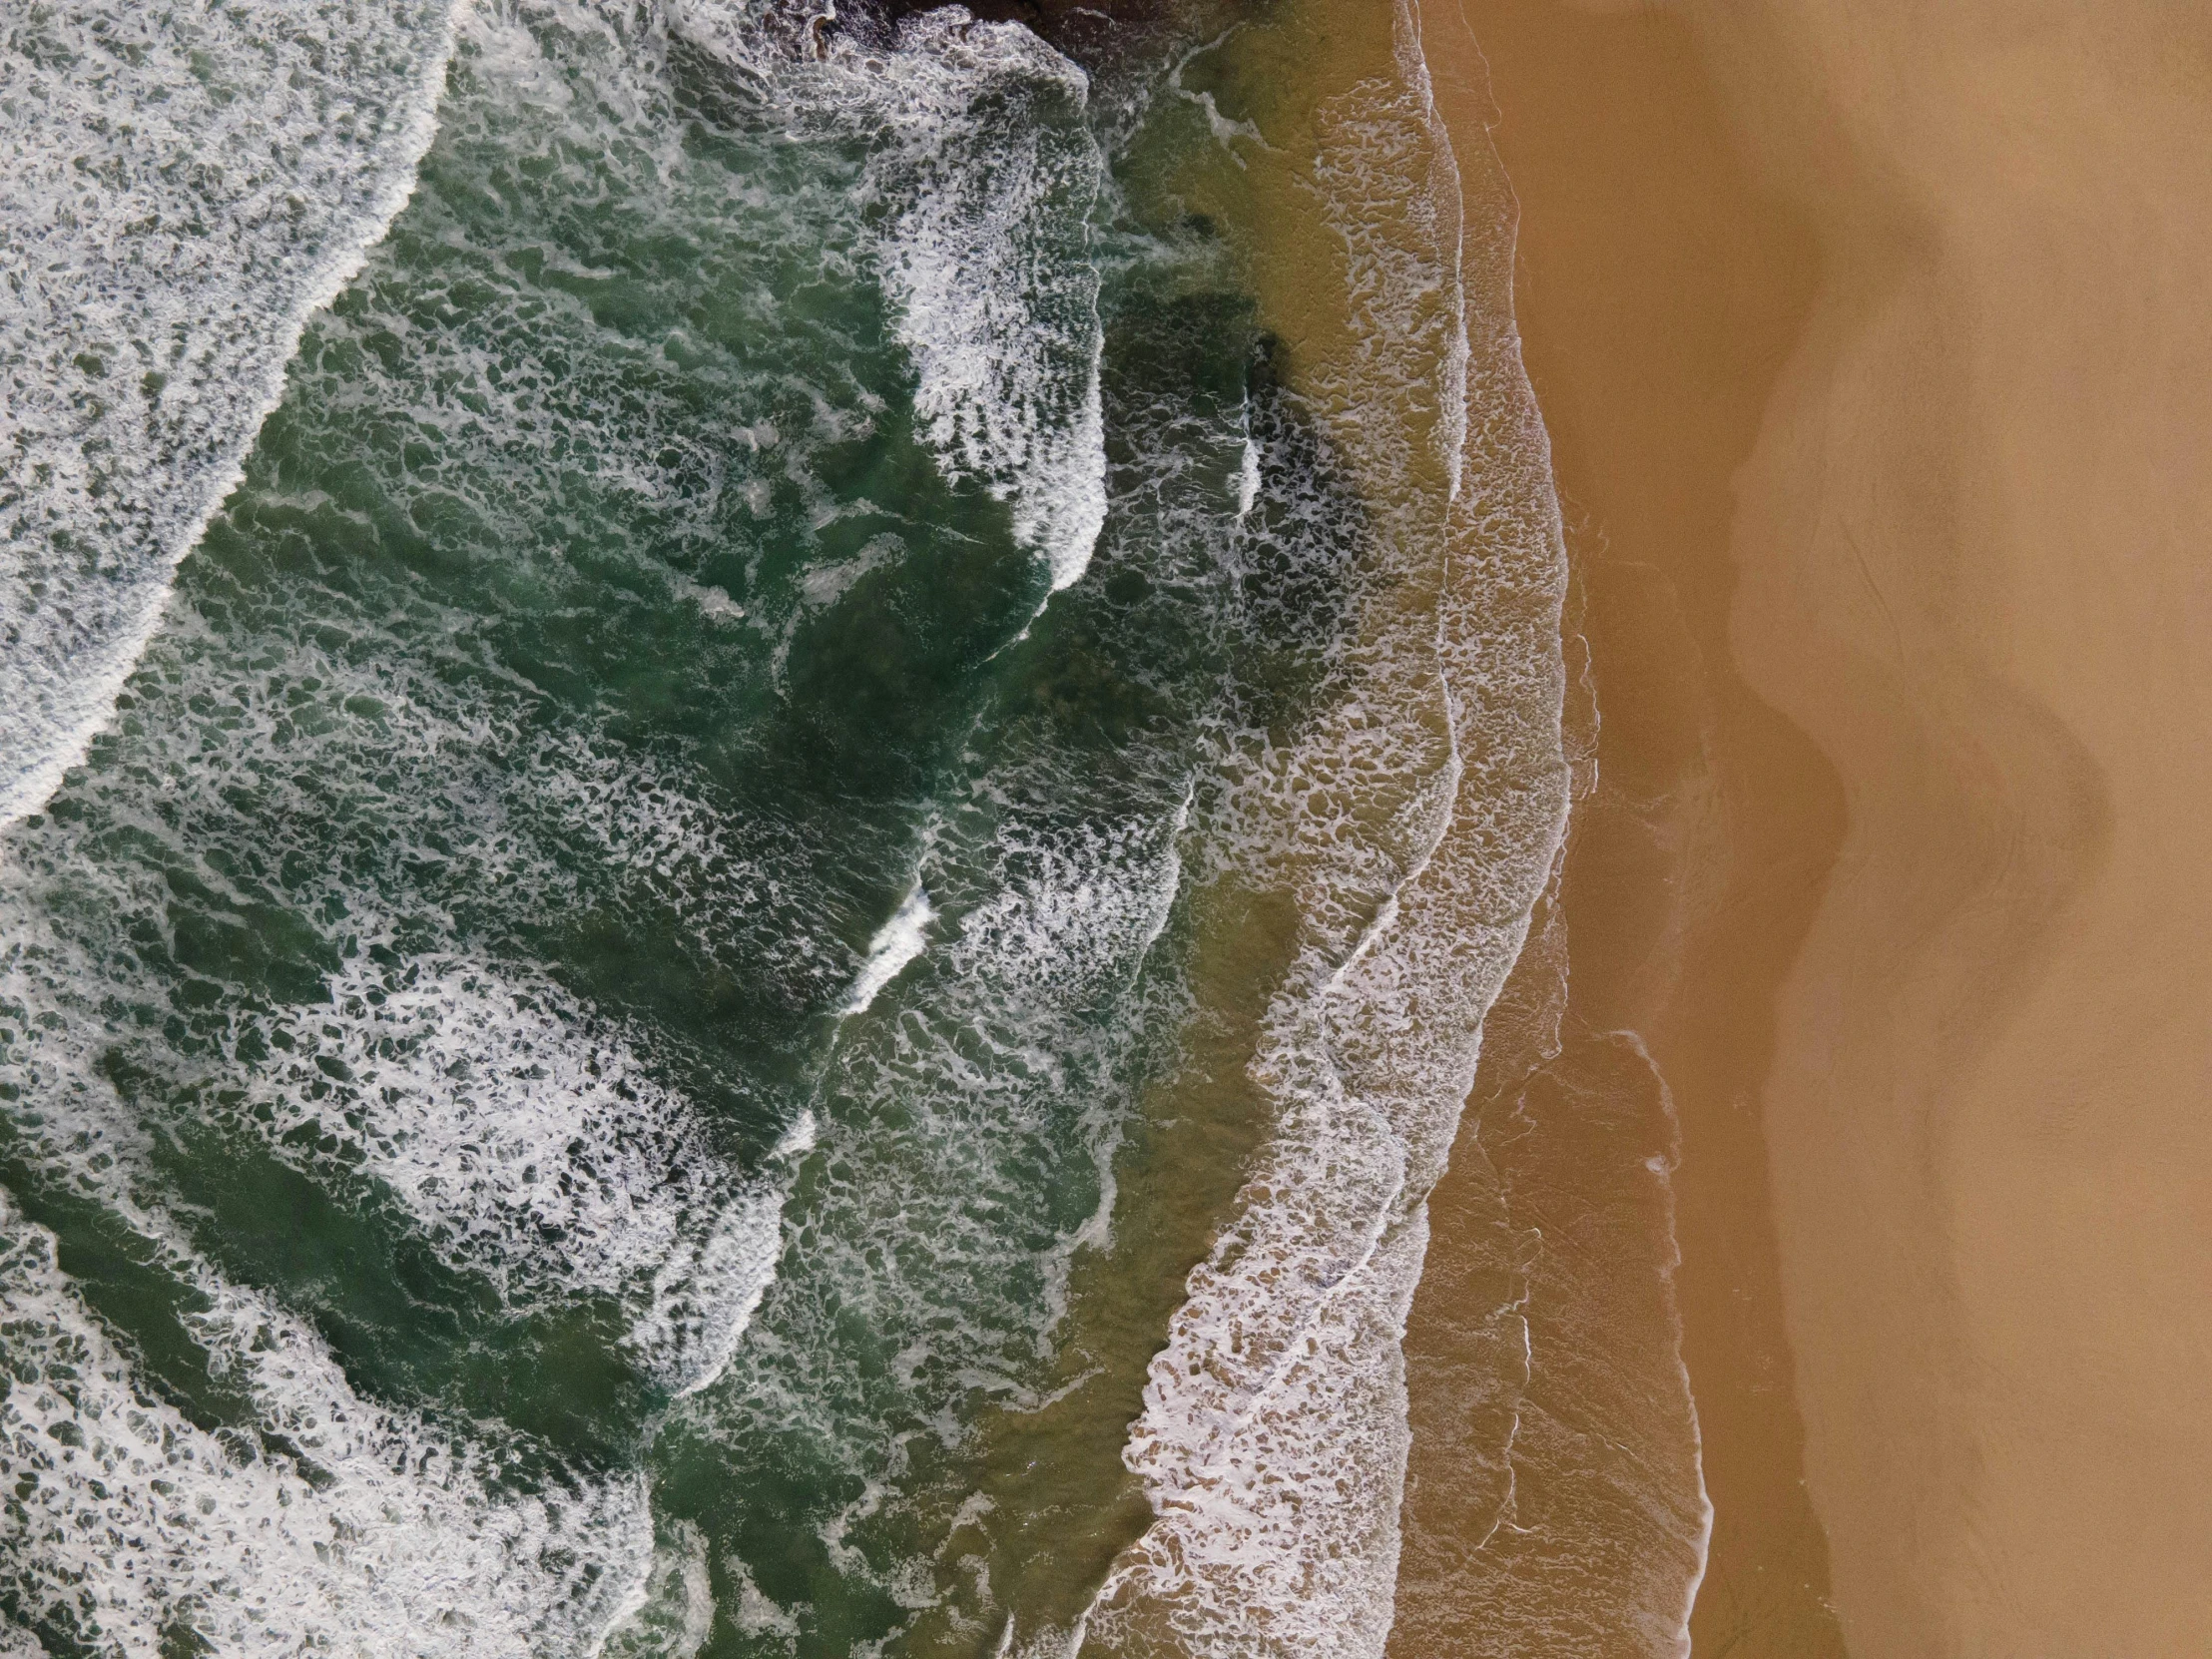 water and sand waves at the beach, aerial view